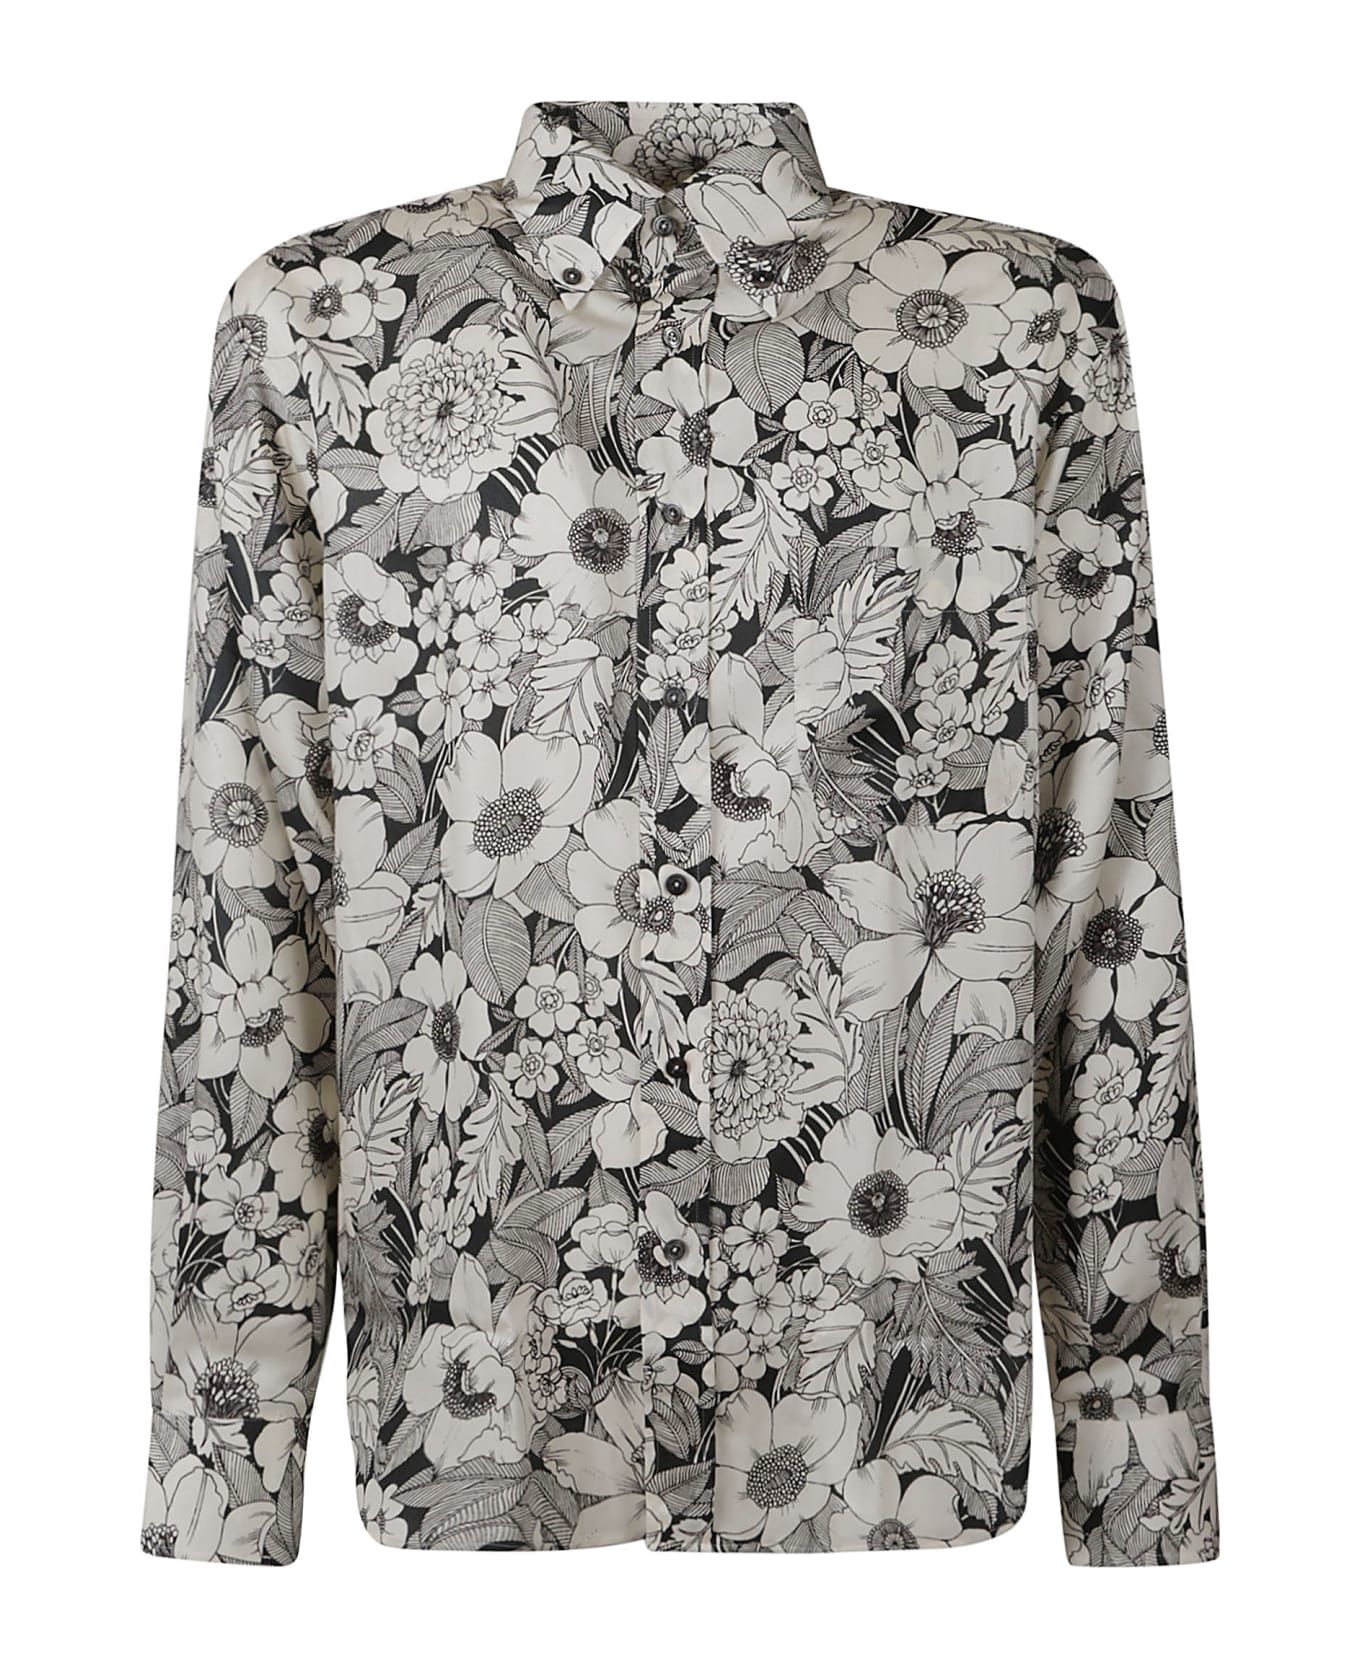 Tom Ford Floral Printed Shirt - Combo White/Black